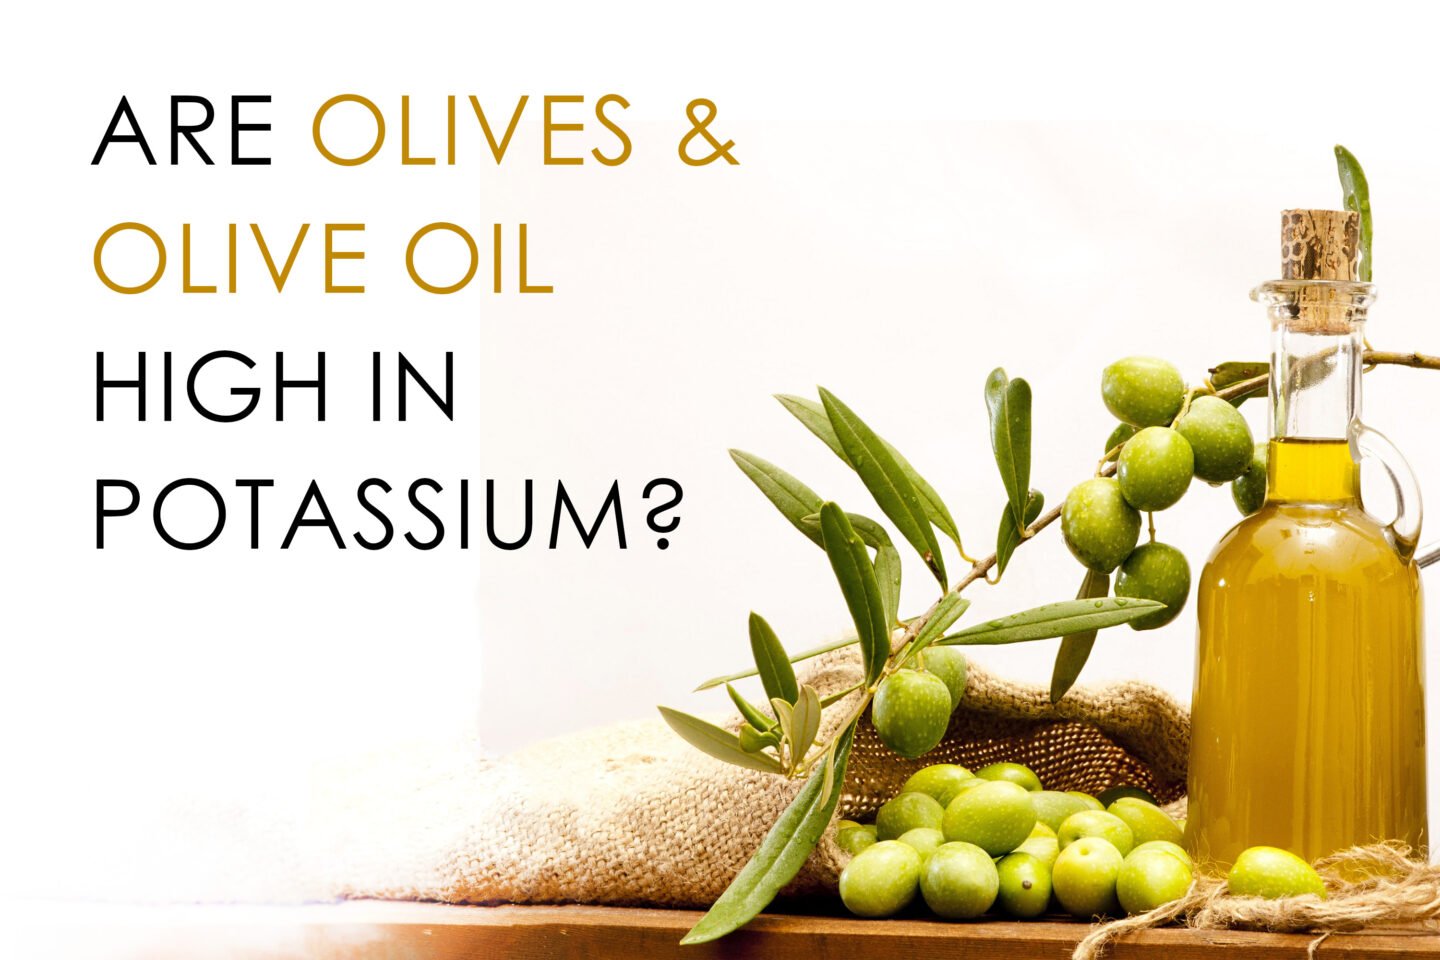 olives and olive oil high in potassium